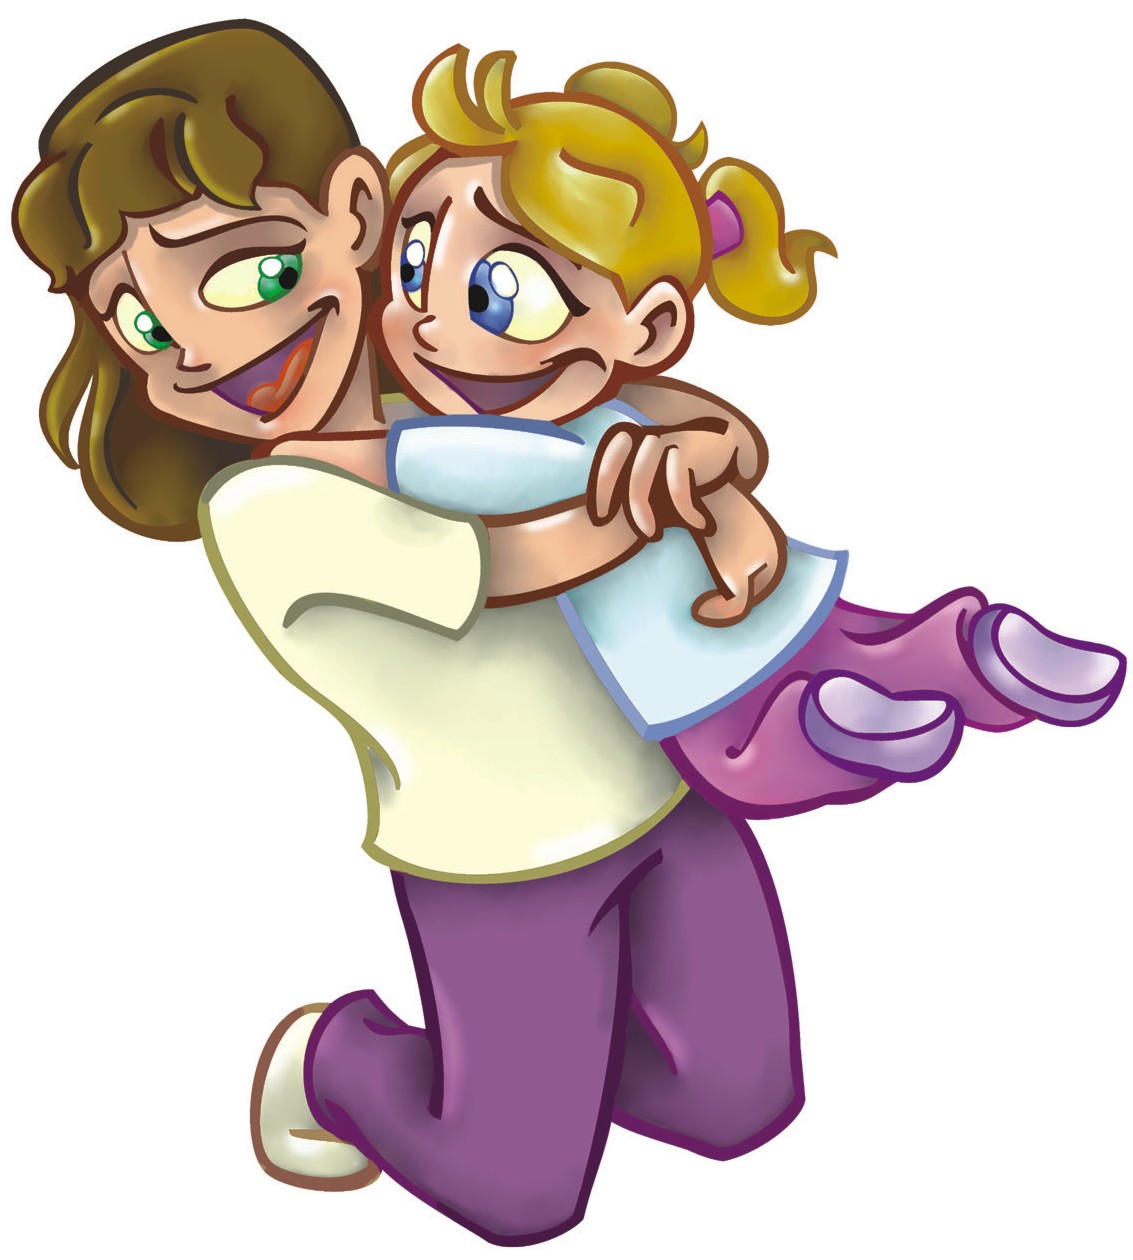 Clipart Hugs Free Cliparts That You Can Download To You Computer And    